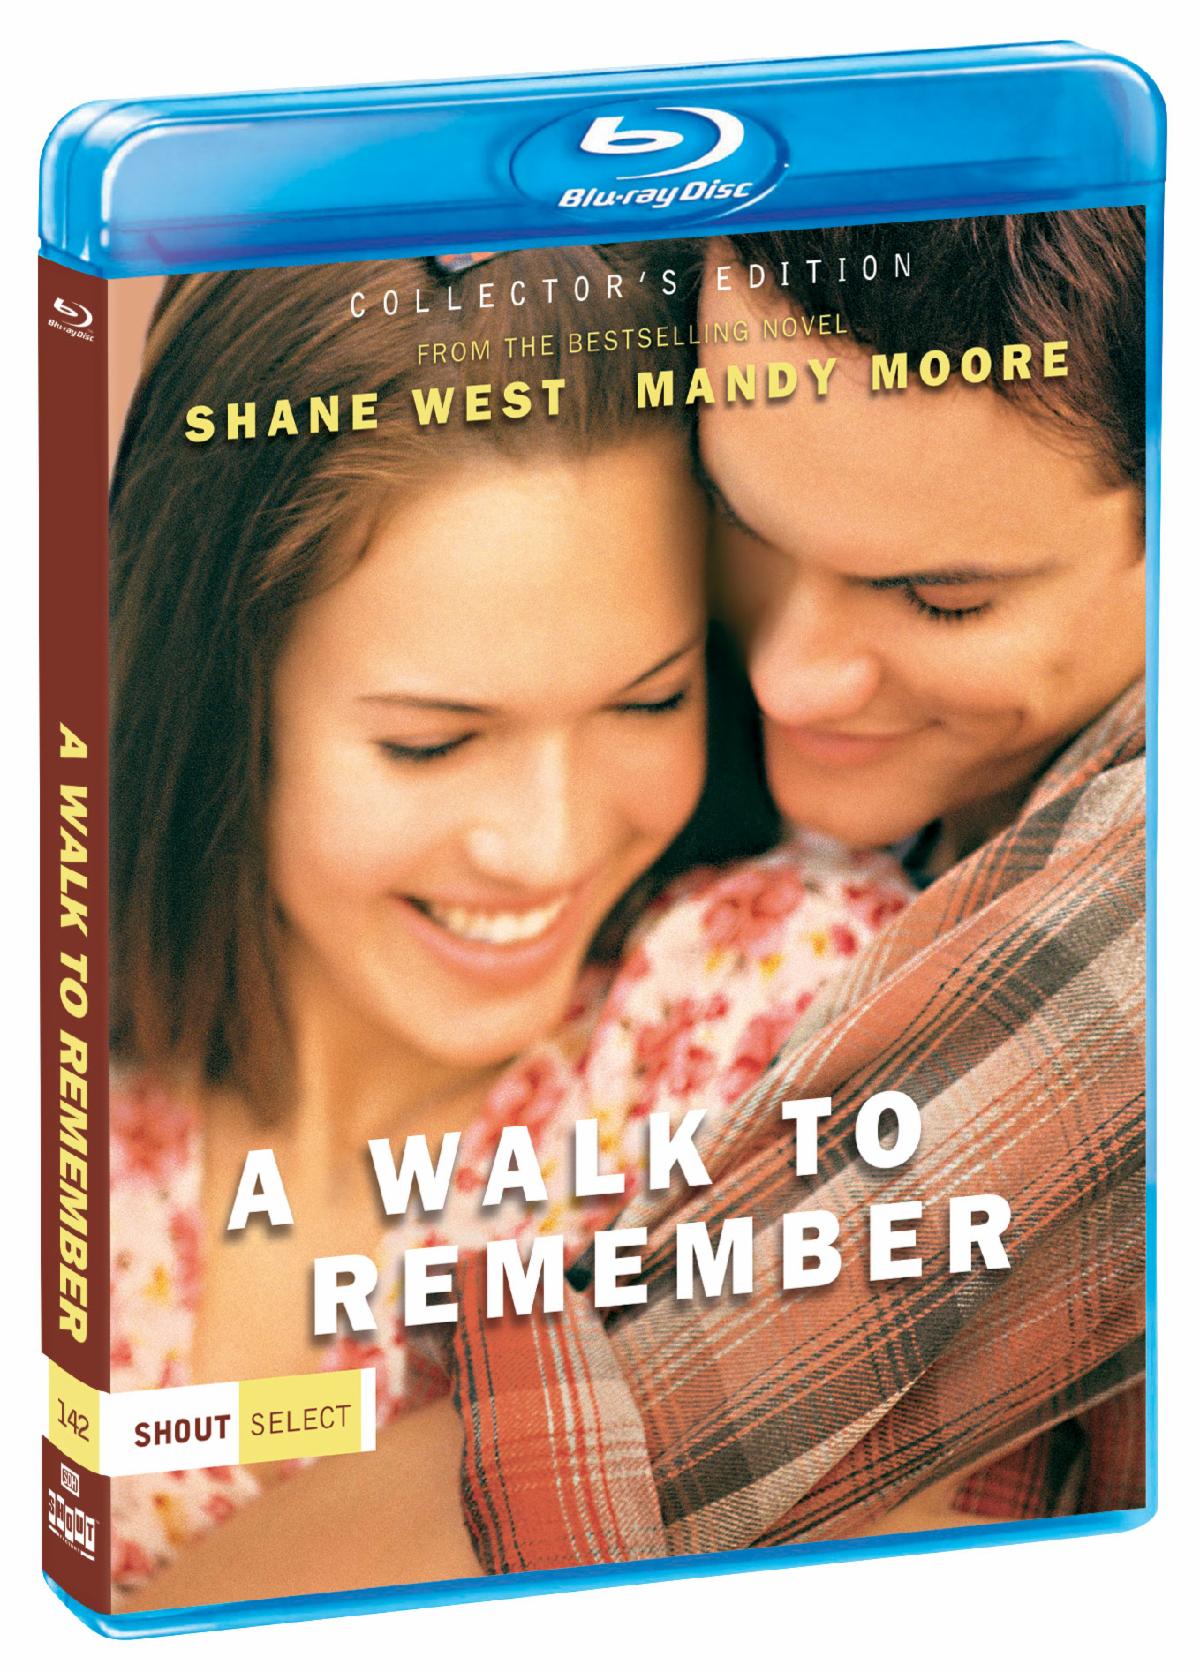 'A Walk To Remember' 20th Anniversary